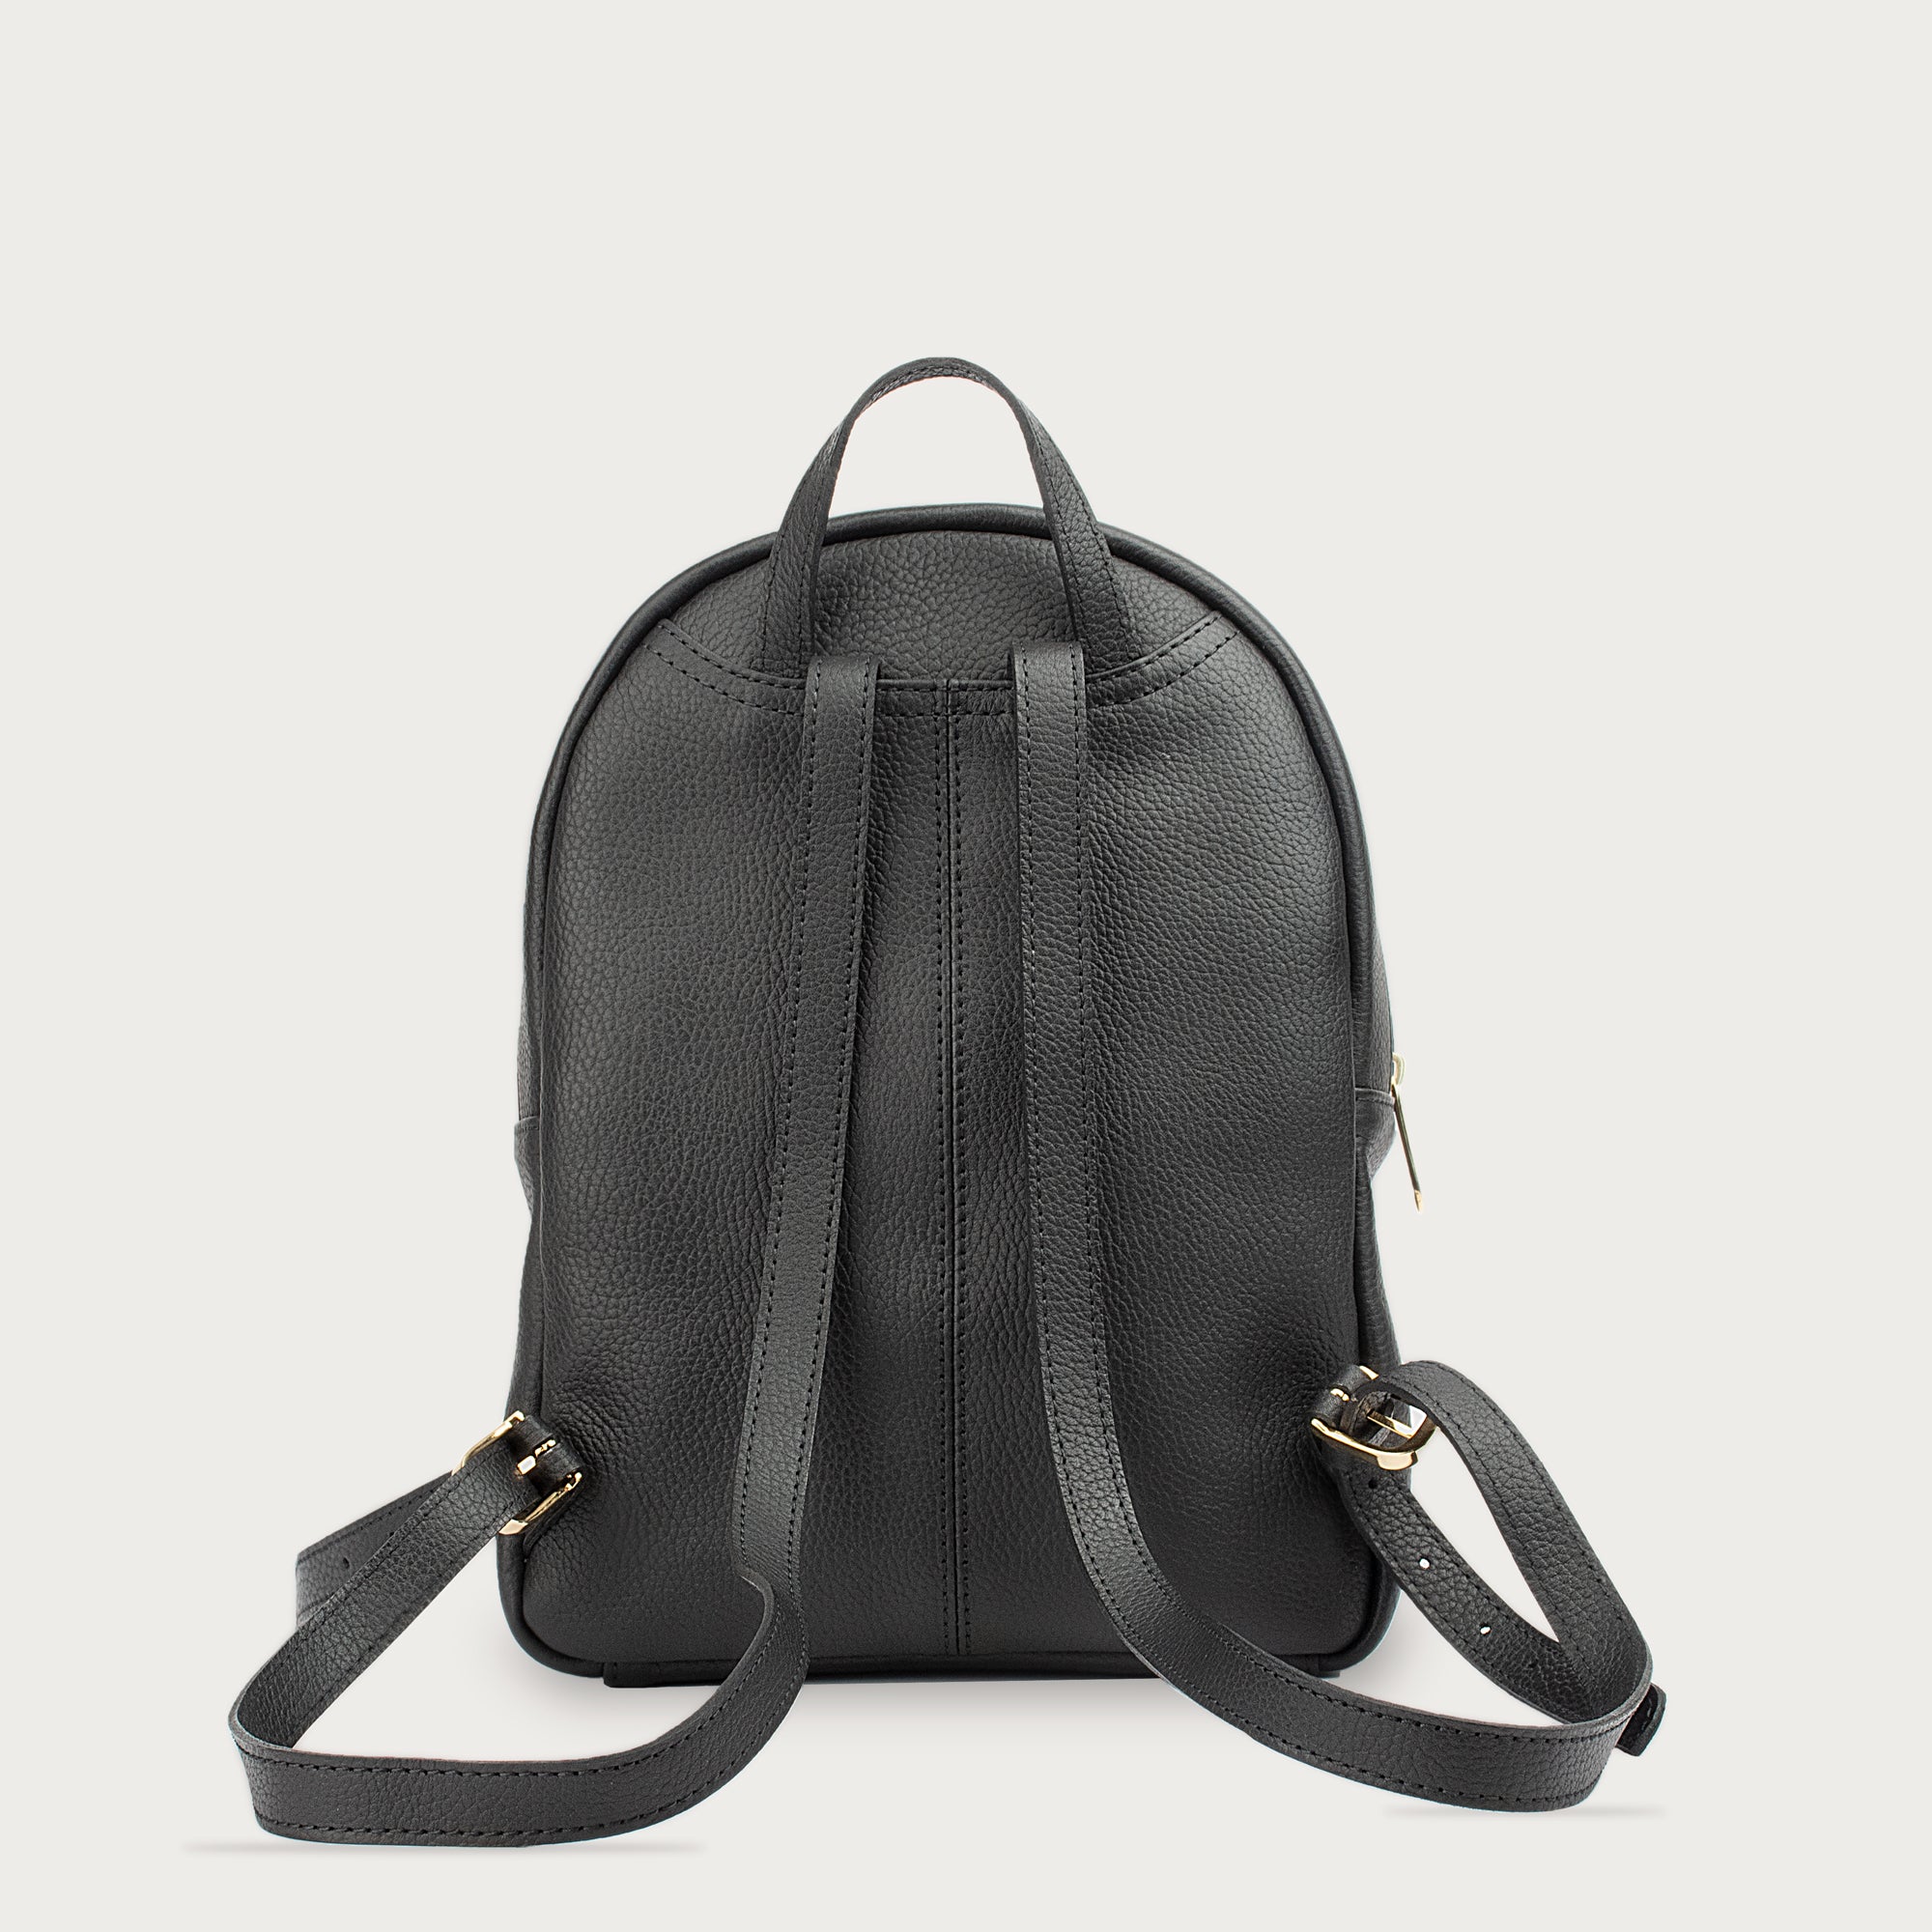 CLASSIC ZIPPERED LEATHER BACKPACK - MEDIUM - Go Forth Goods ®